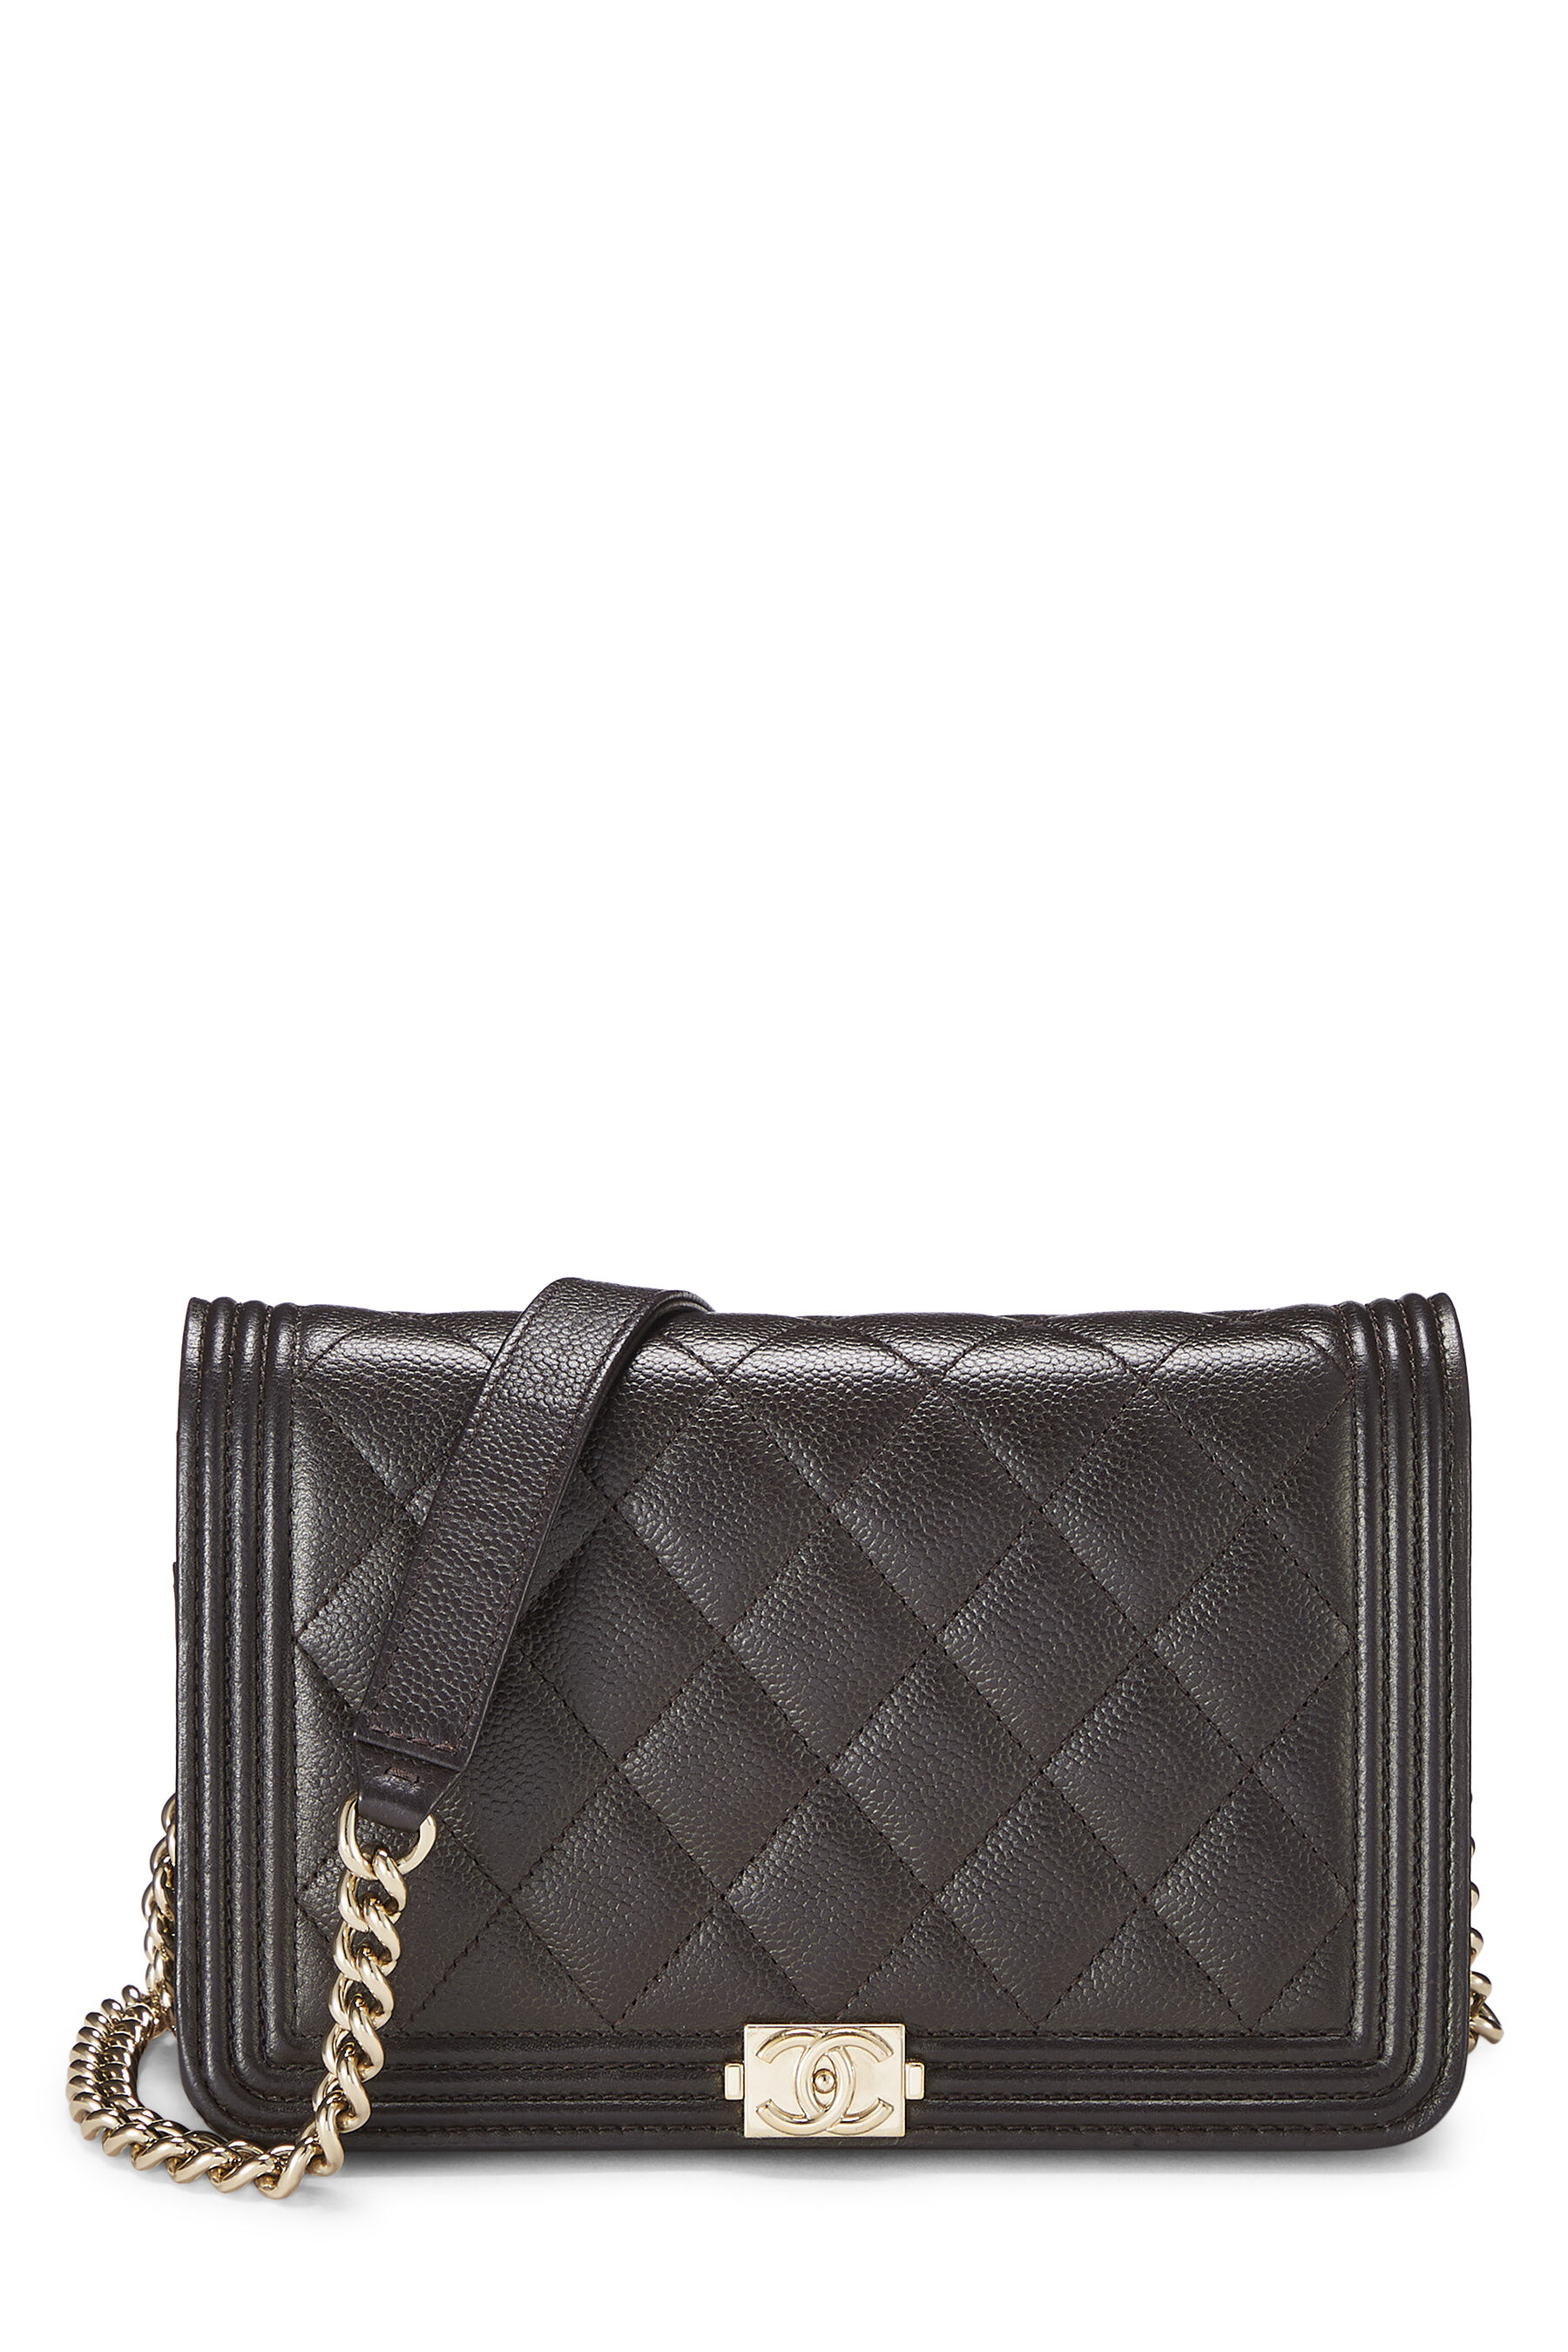 Chanel - Brown Quilted Caviar Boy Wallet on Chain (WOC)